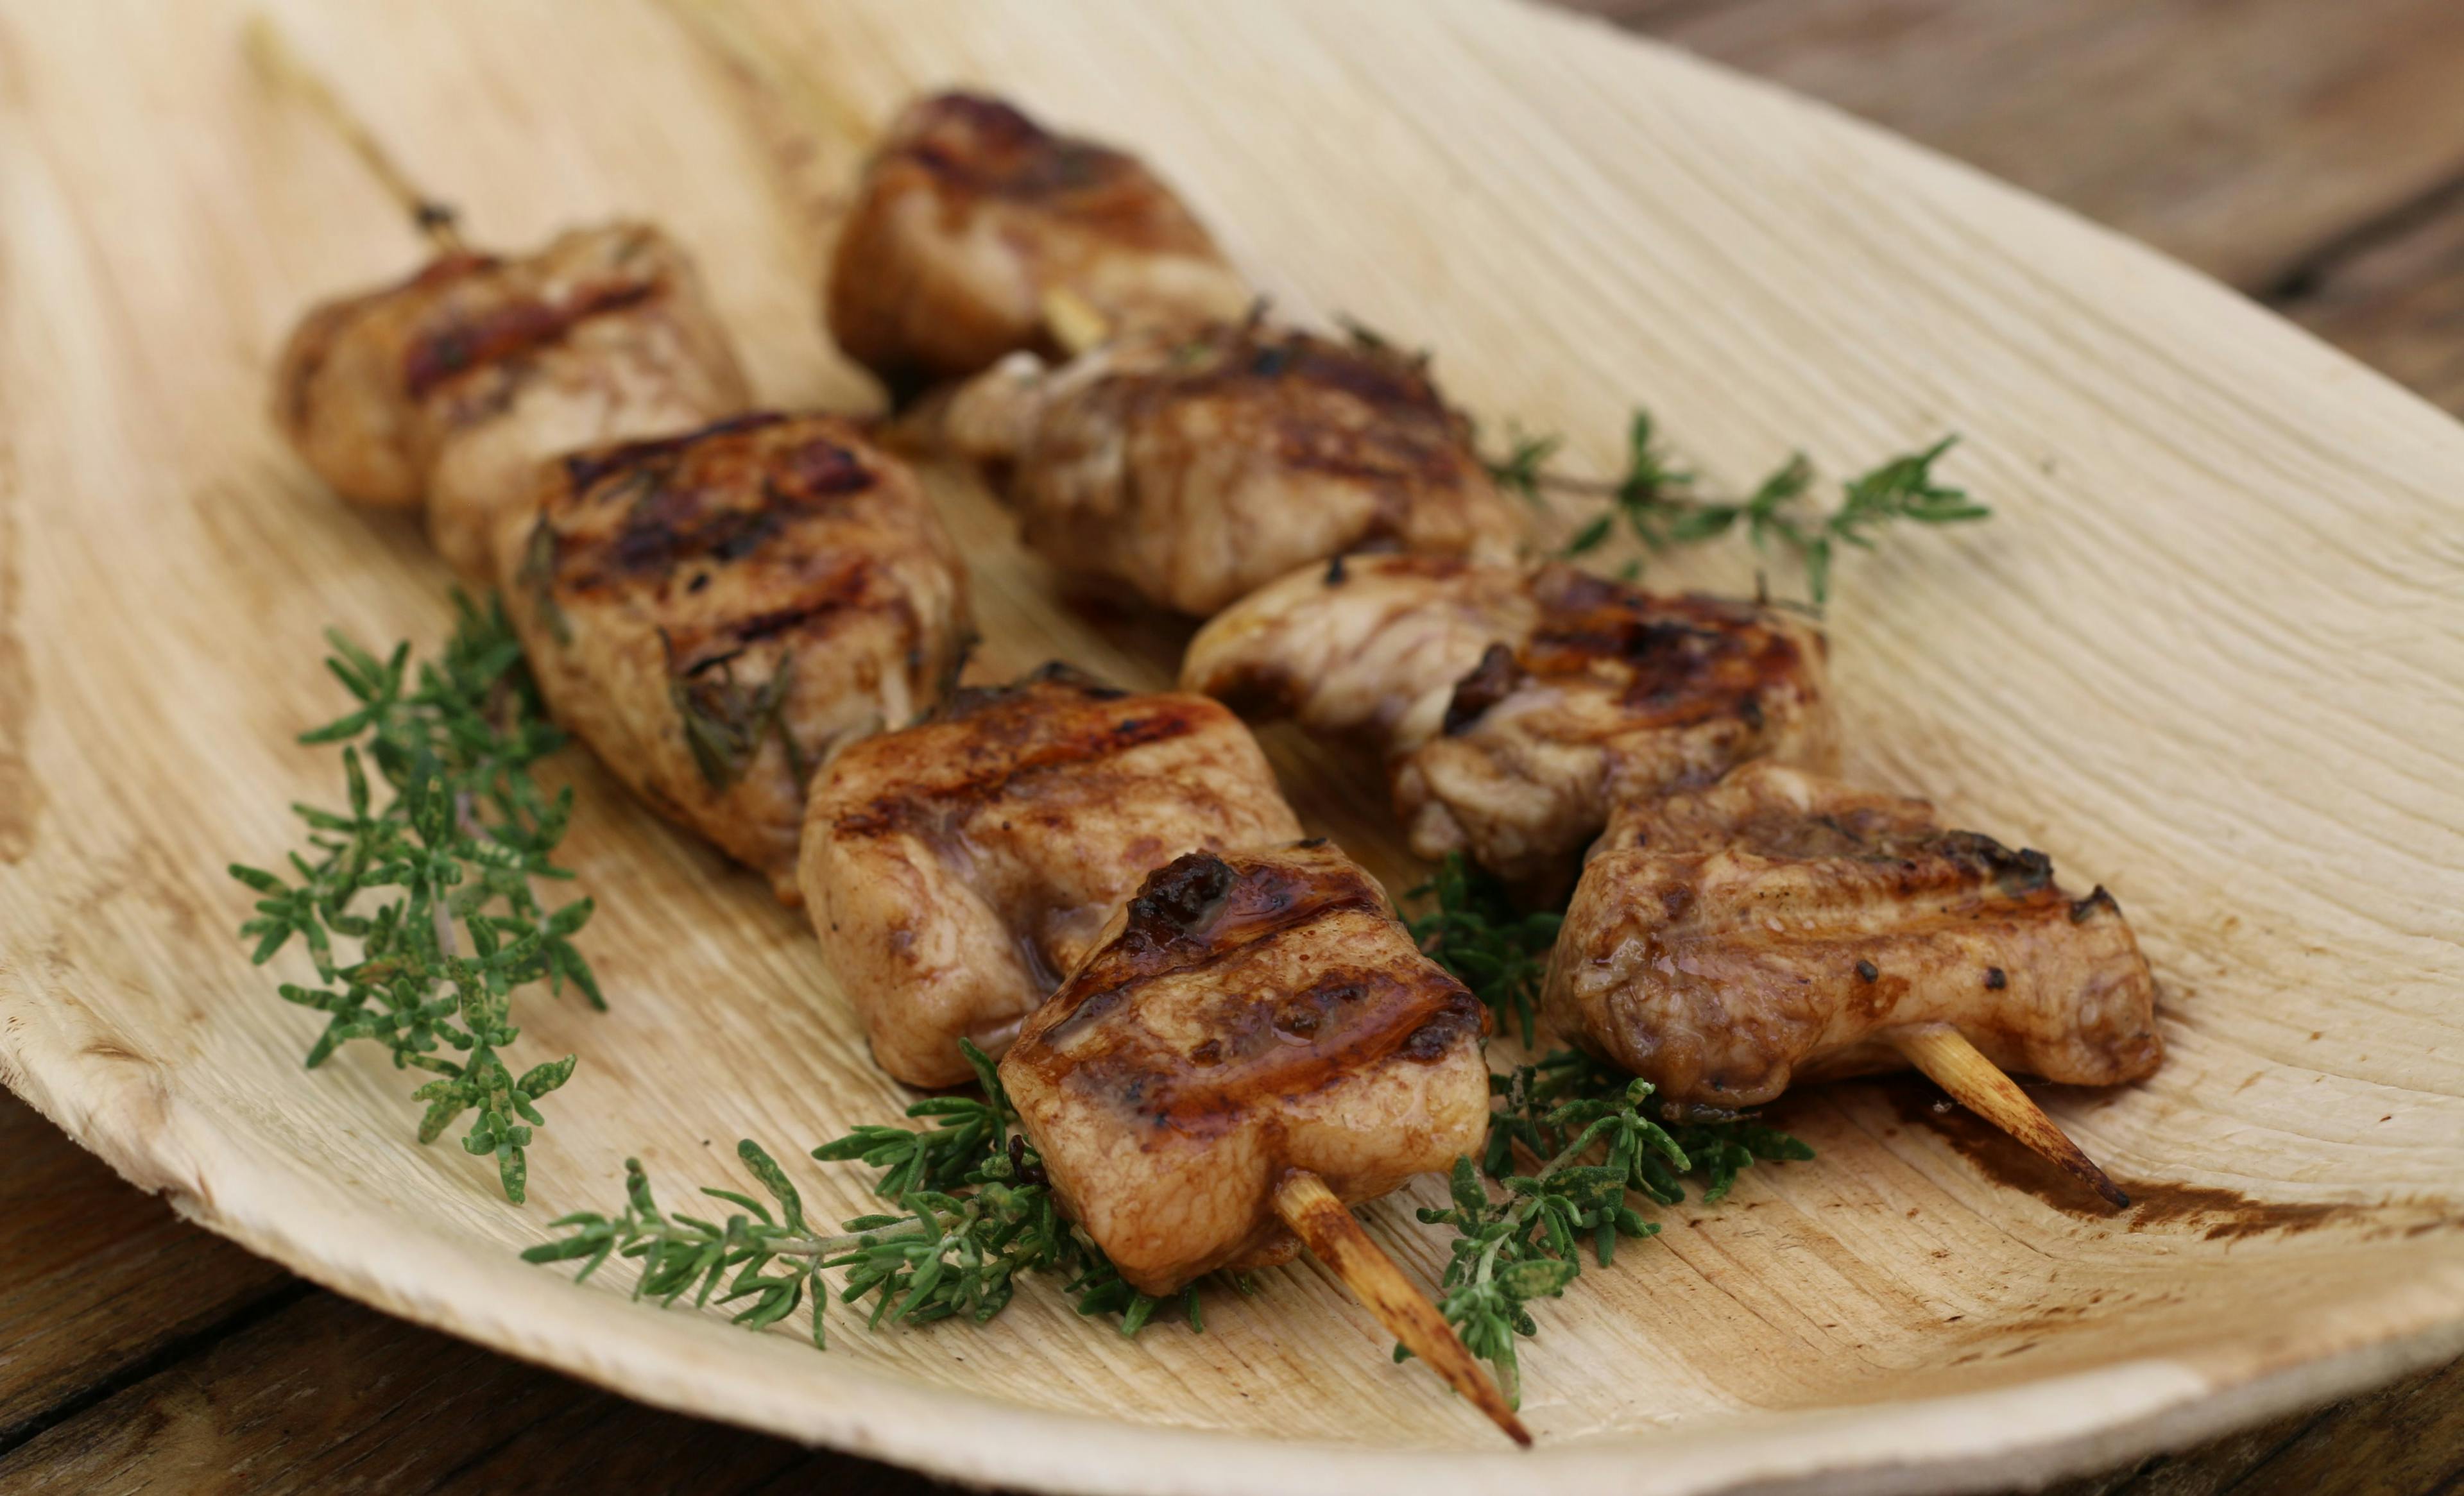 Chicken skewer with balsamic vinegar and thyme